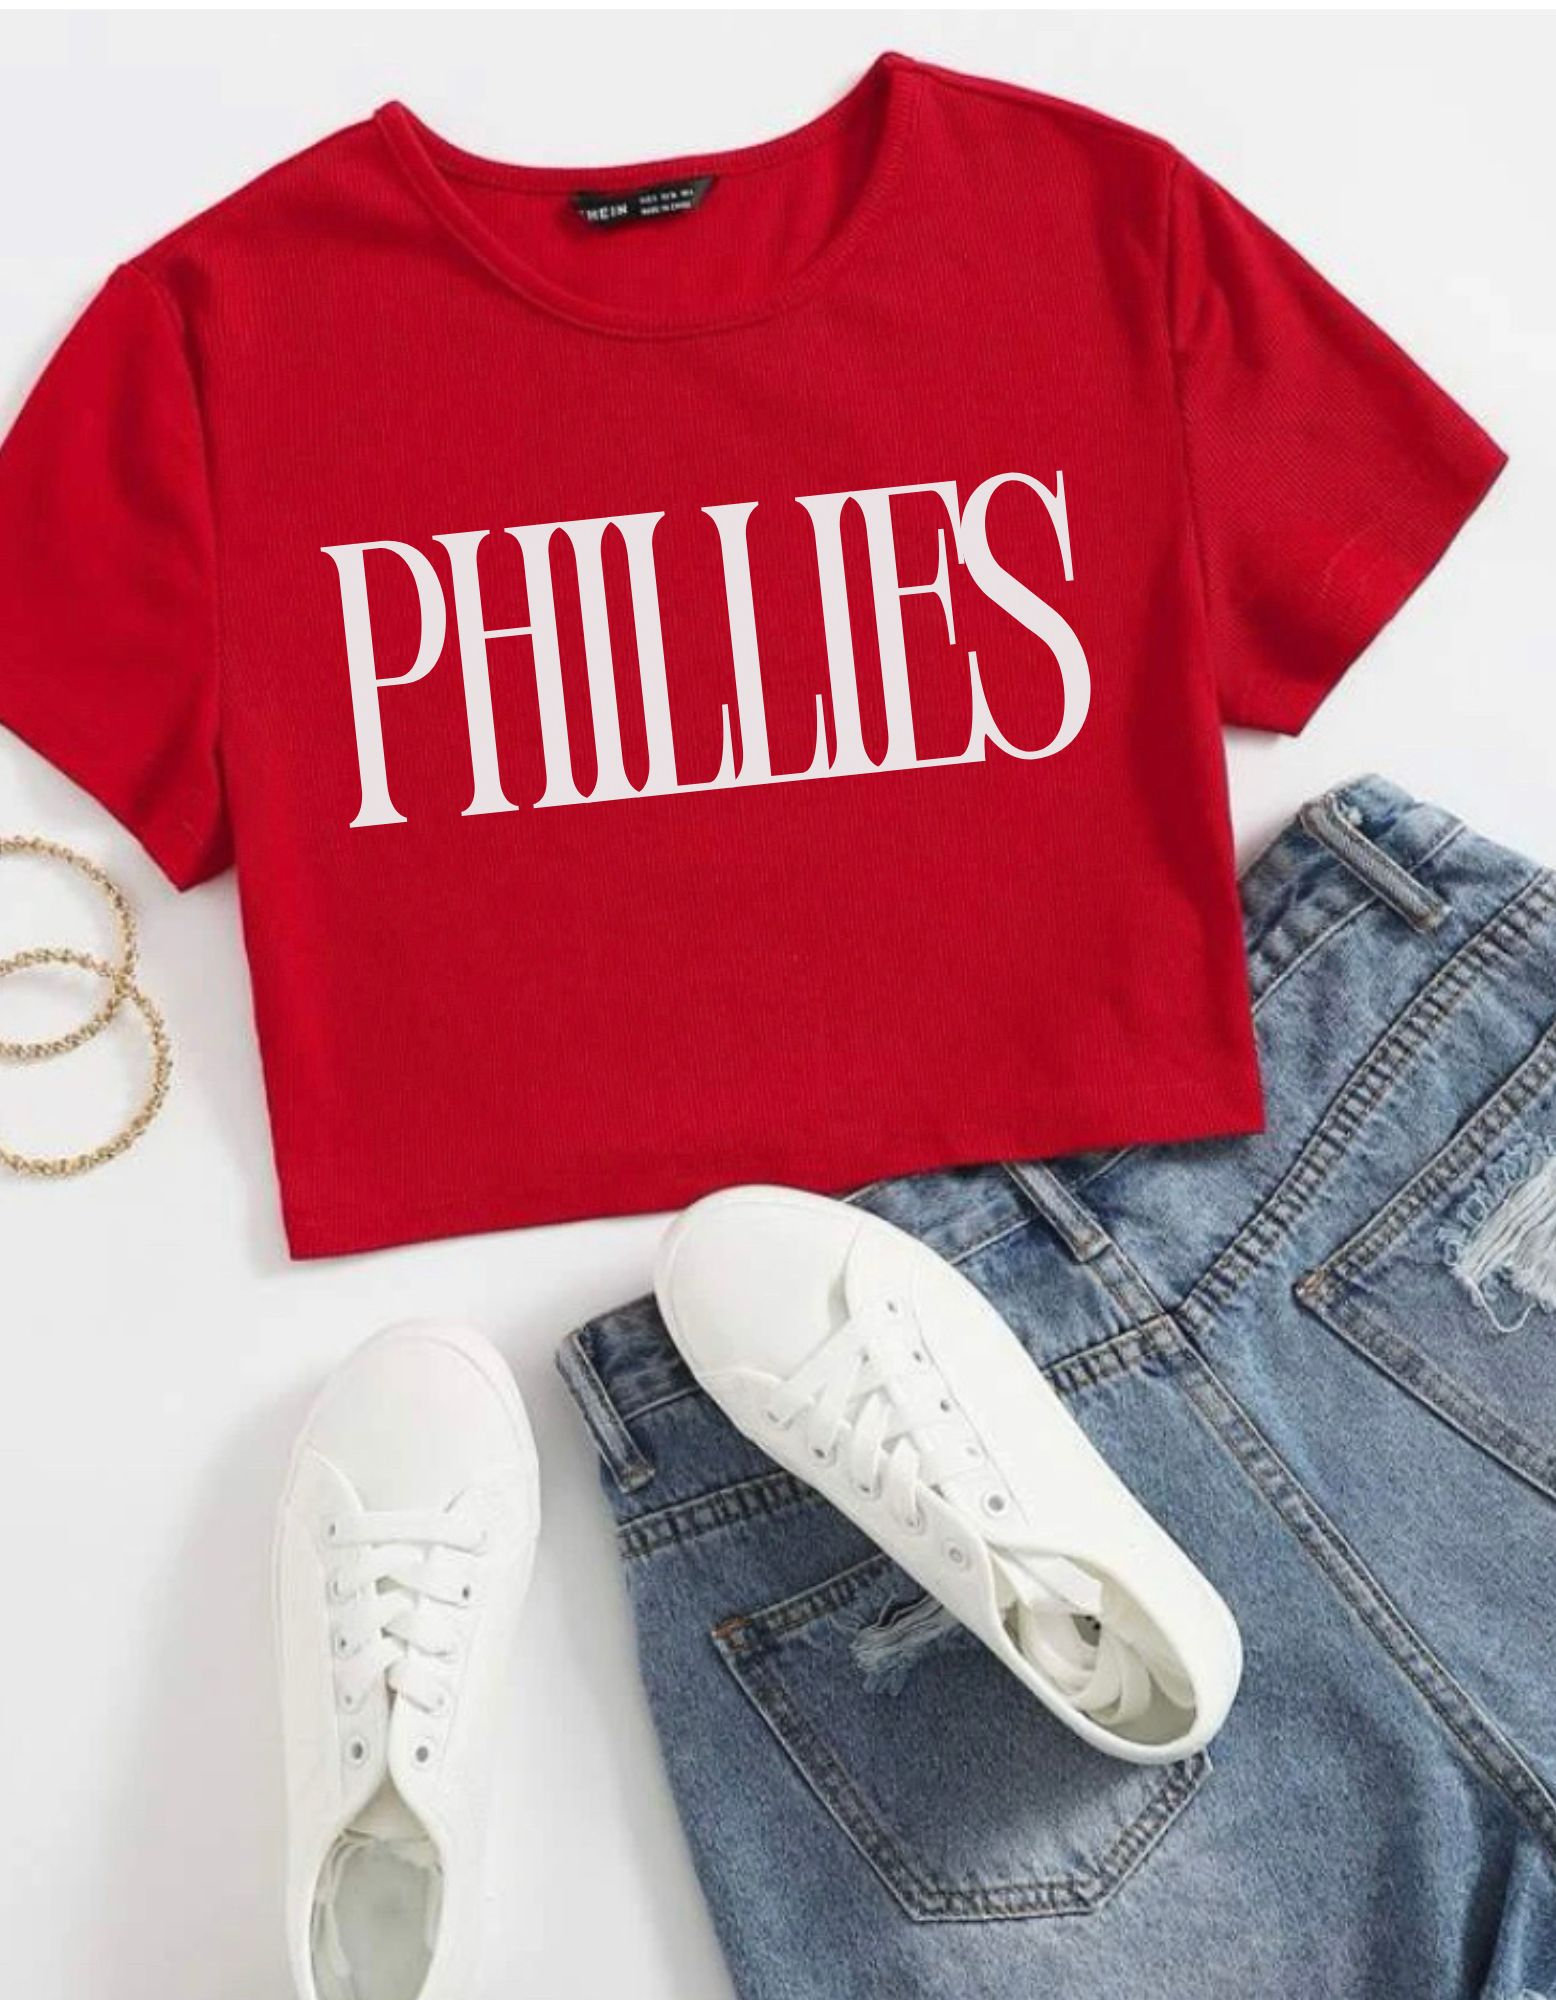 phillies cropped shirt